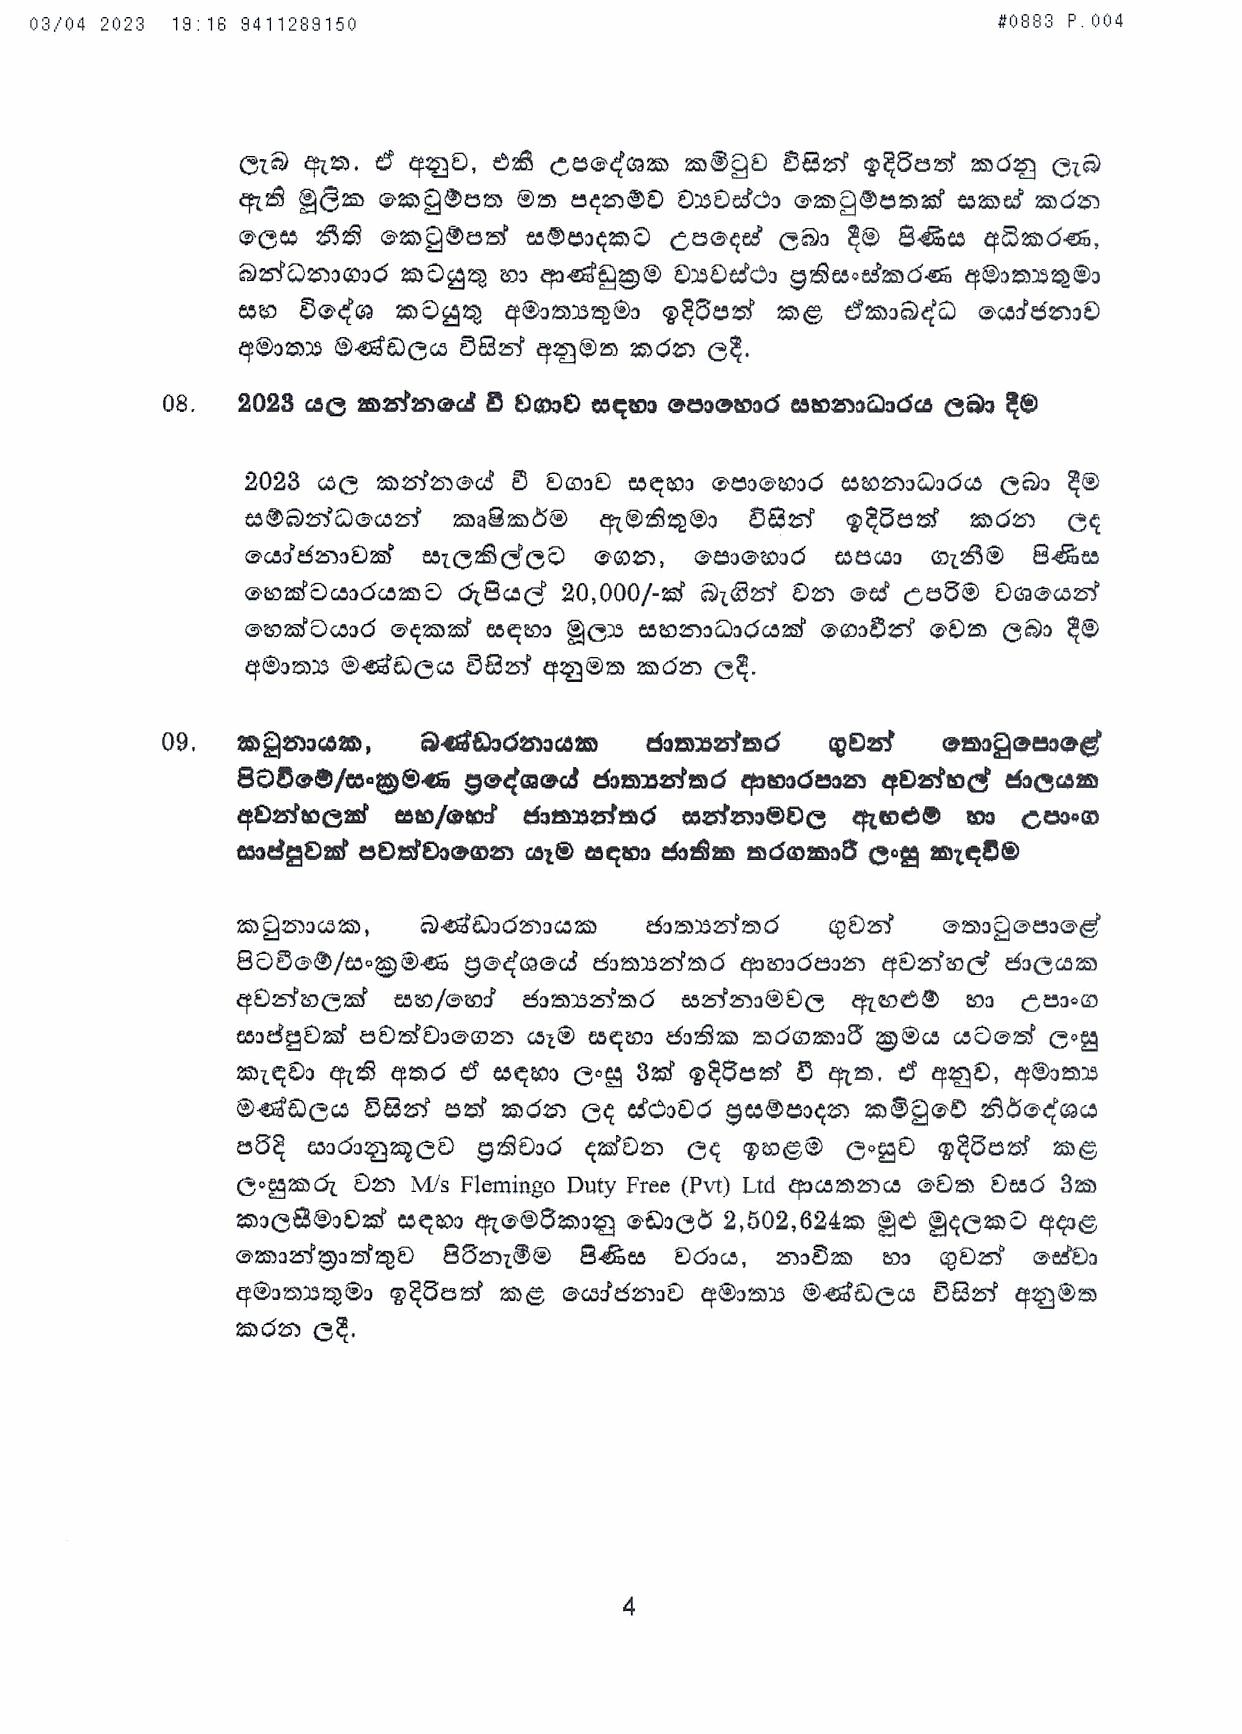 Cabinet Decision on 03.04.2023 page 004